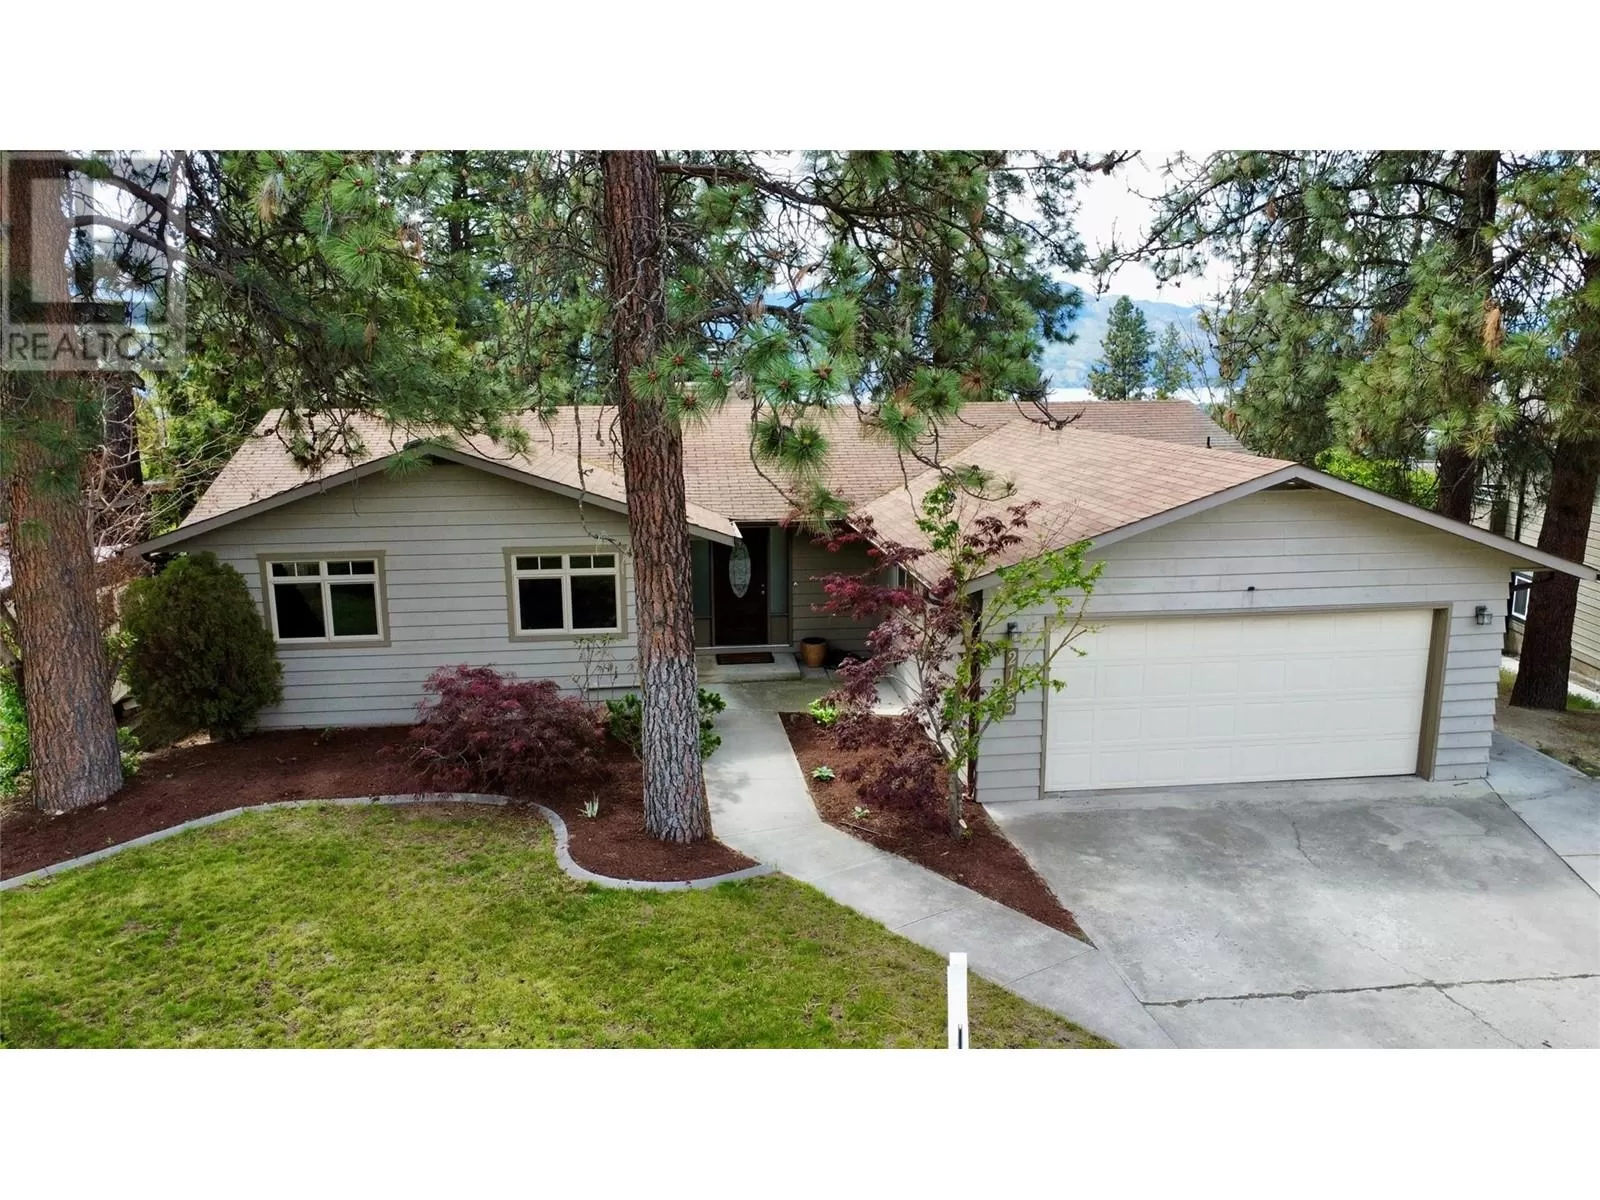 House for rent: 2185 Shannon Way, West Kelowna, British Columbia V4T 1S2